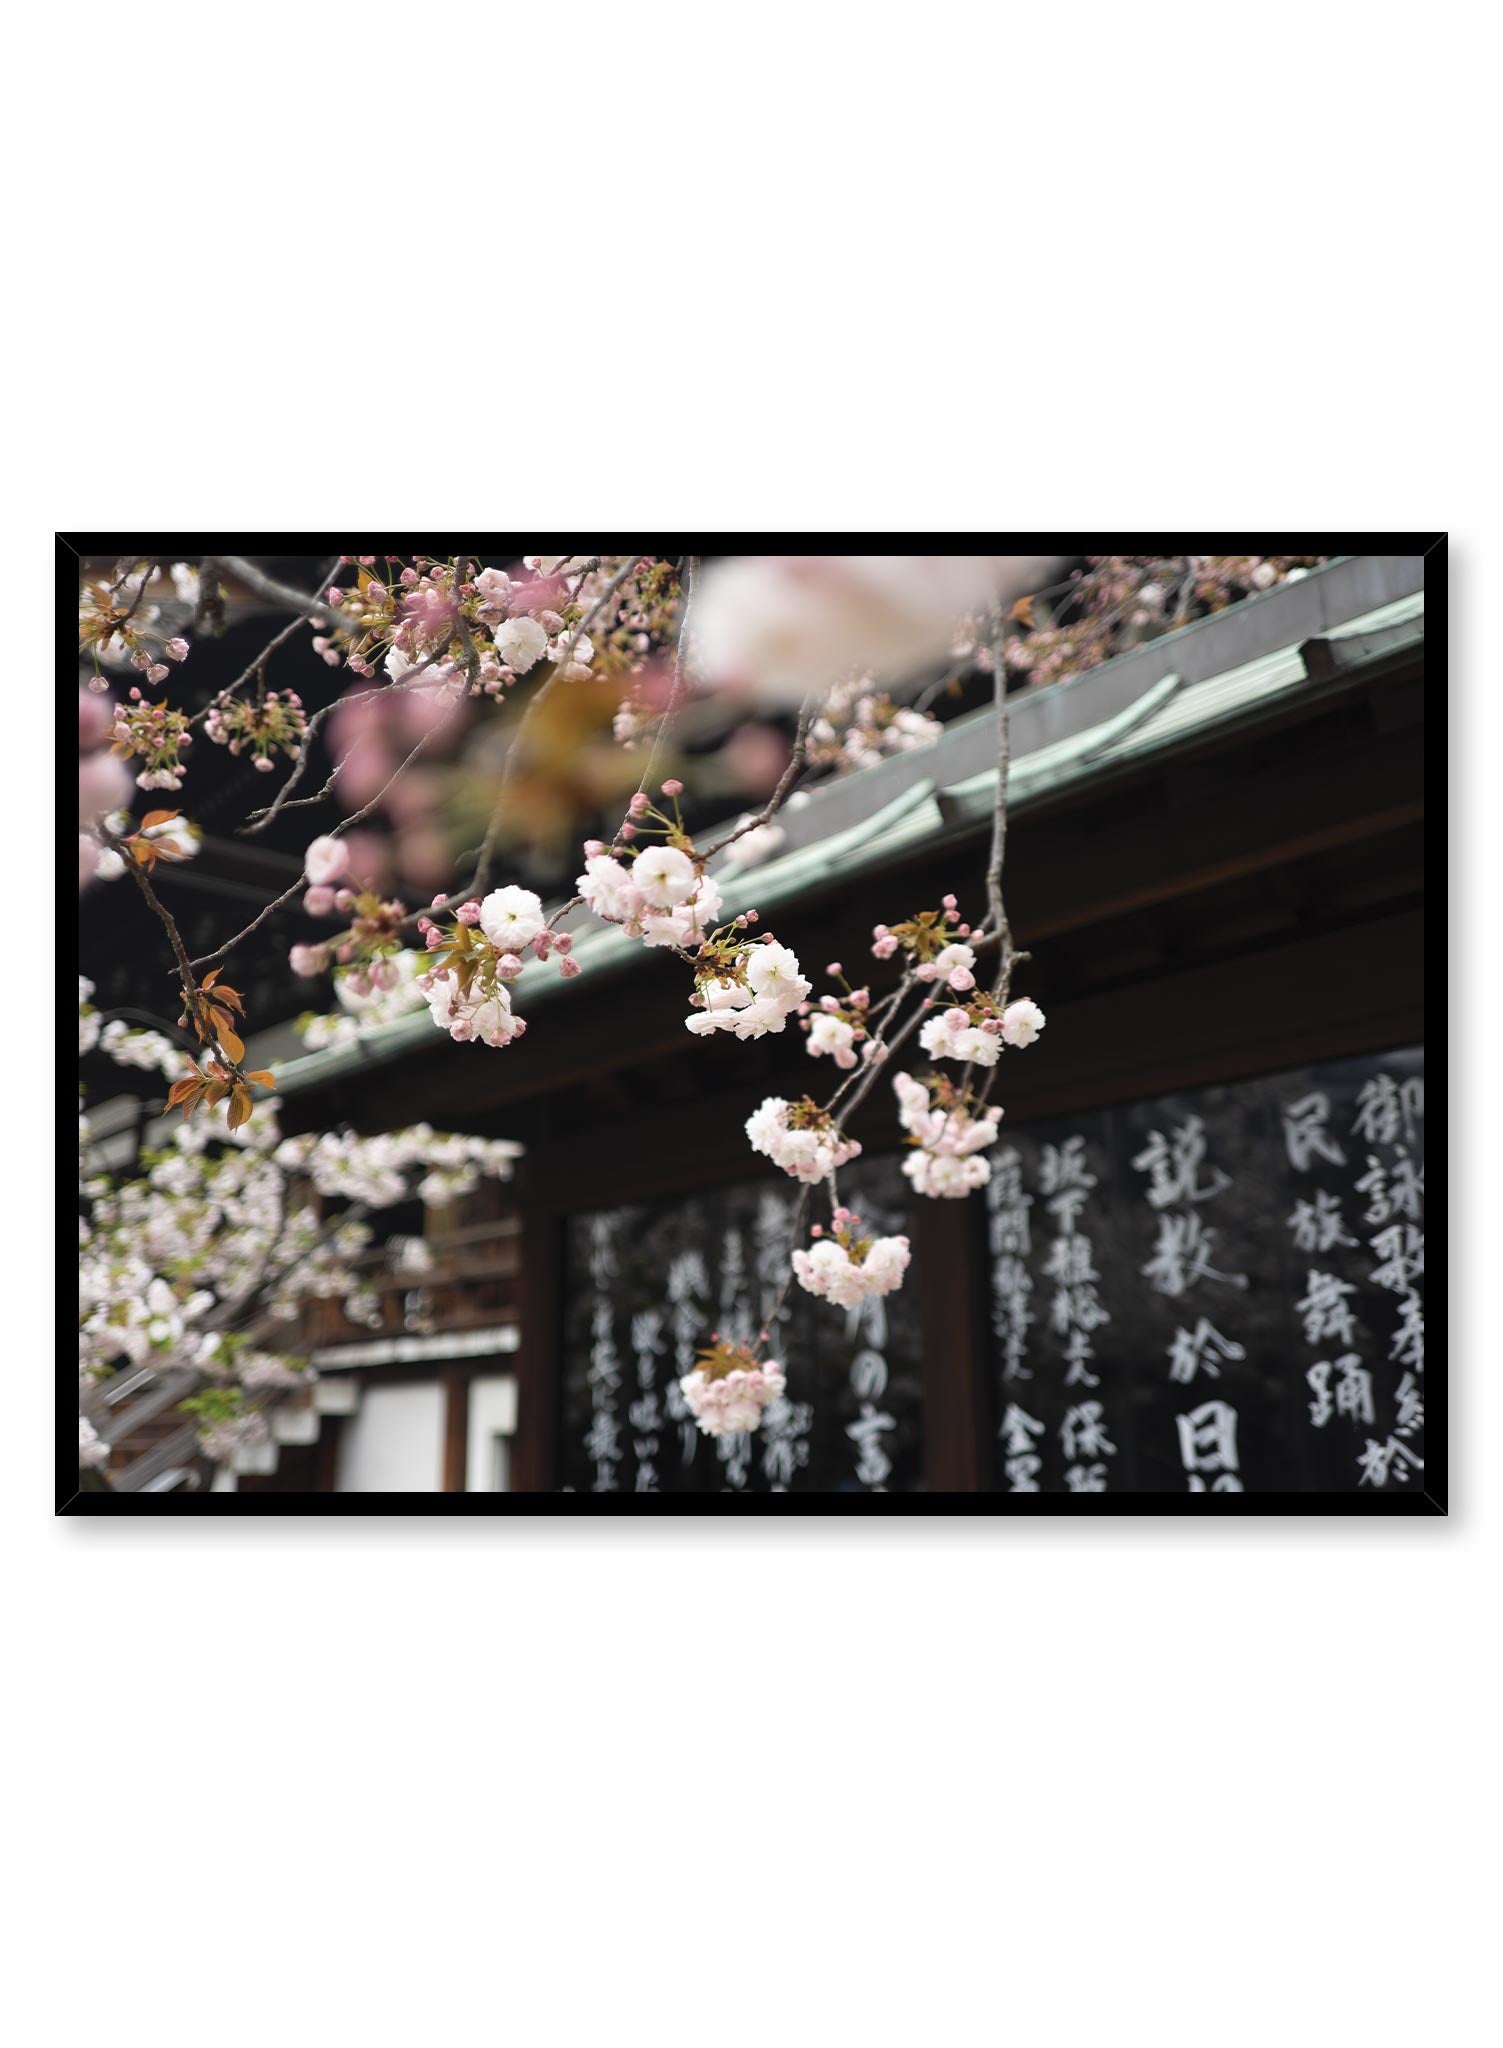 Japanese Bloom is a minimalist photography by Opposite Wall of cherry blossom flowers hanging over the roof of a traditional Japanese sign.